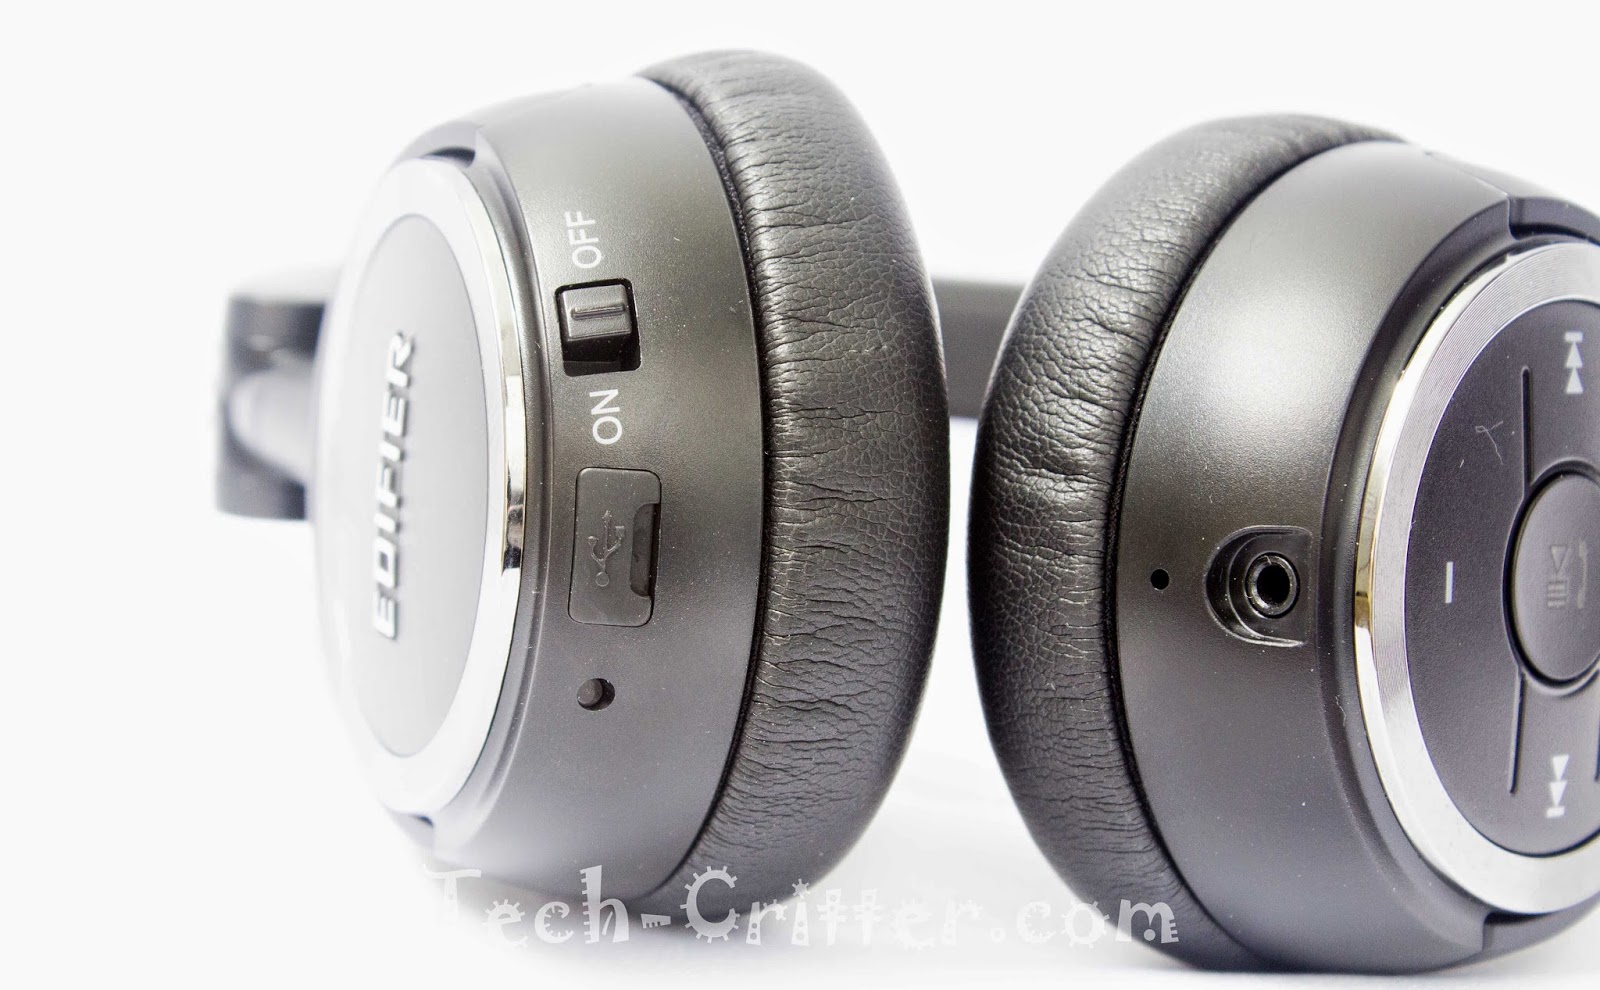 Unboxing & Review: Edifier W670BT Stereo Bluetooth Headset 49